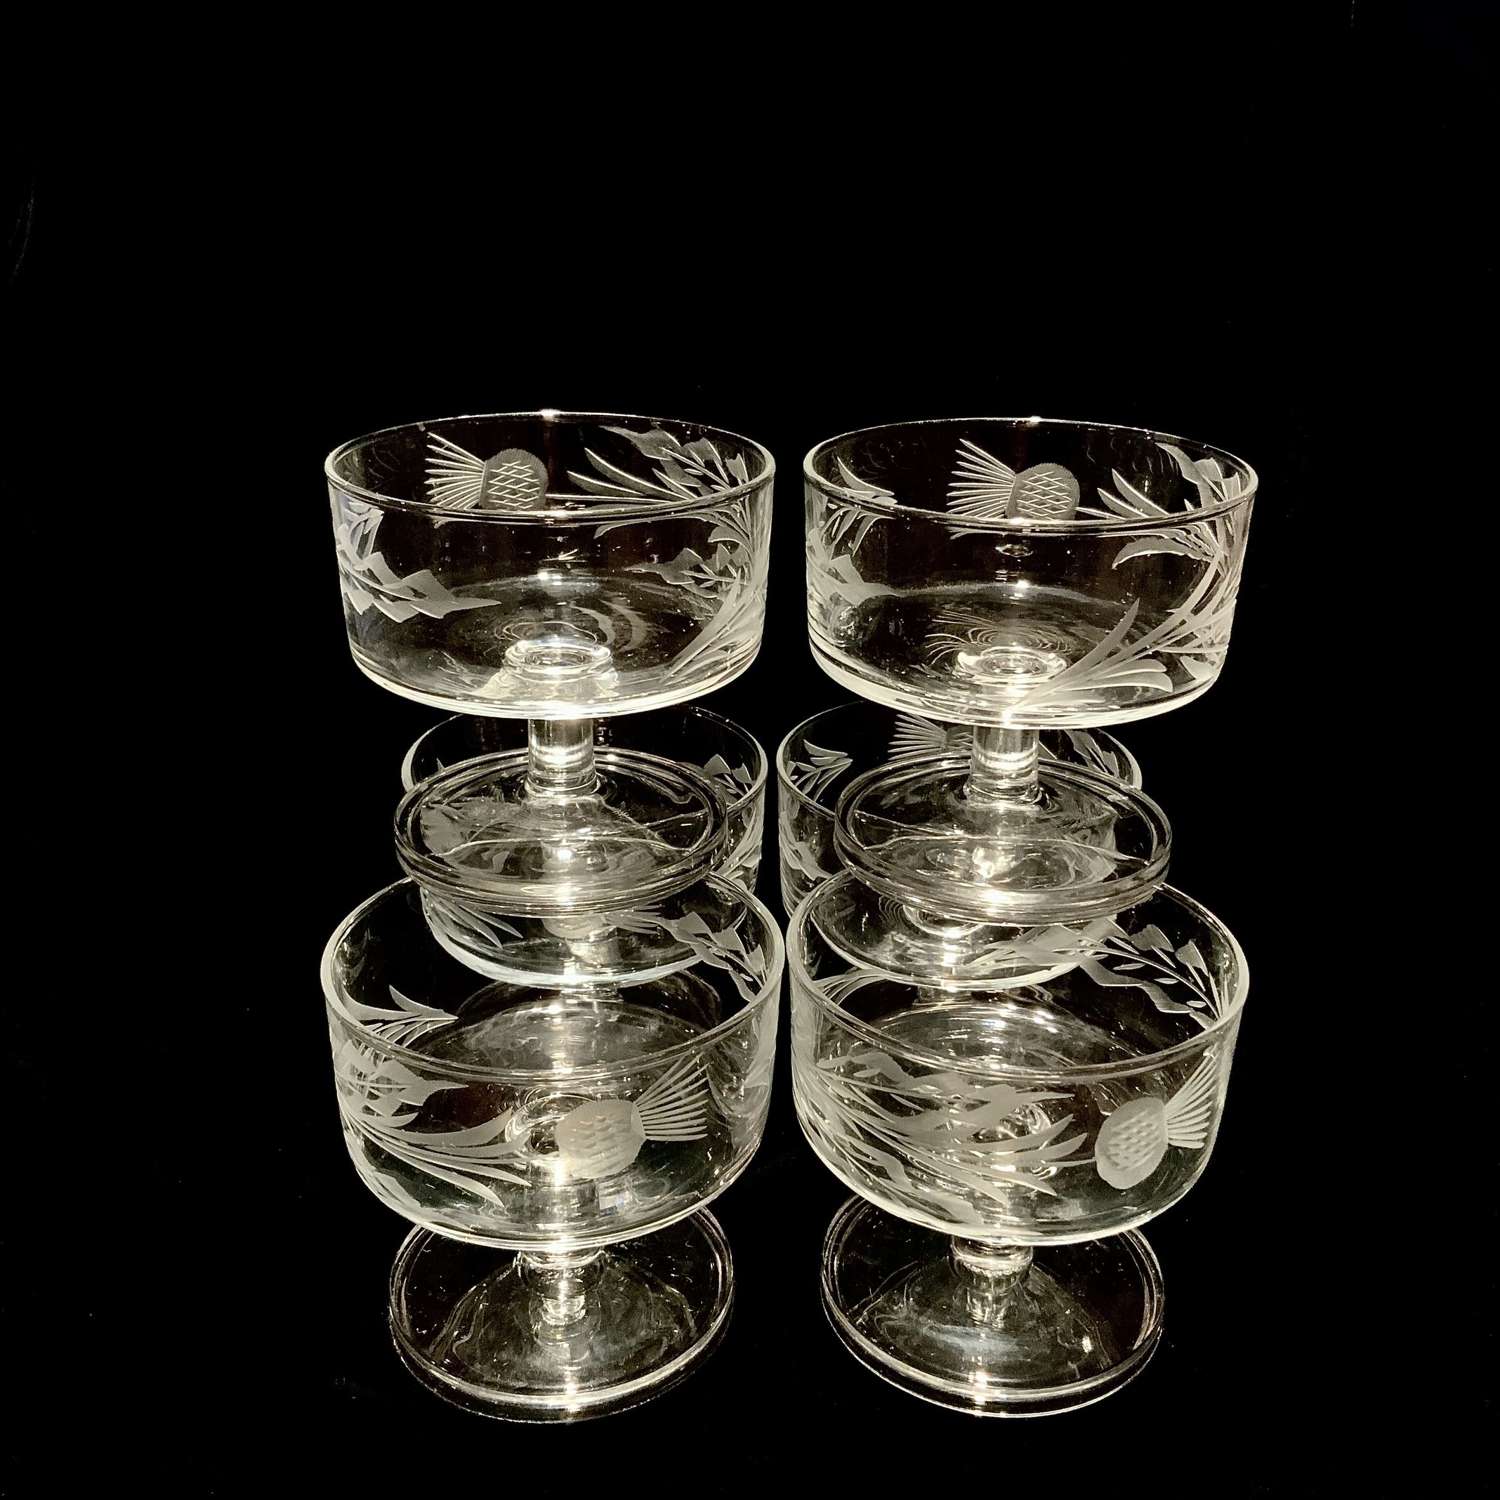 Six (6) Matching “Scottish Thistle” Champagne Glasses, Coupes or Boats